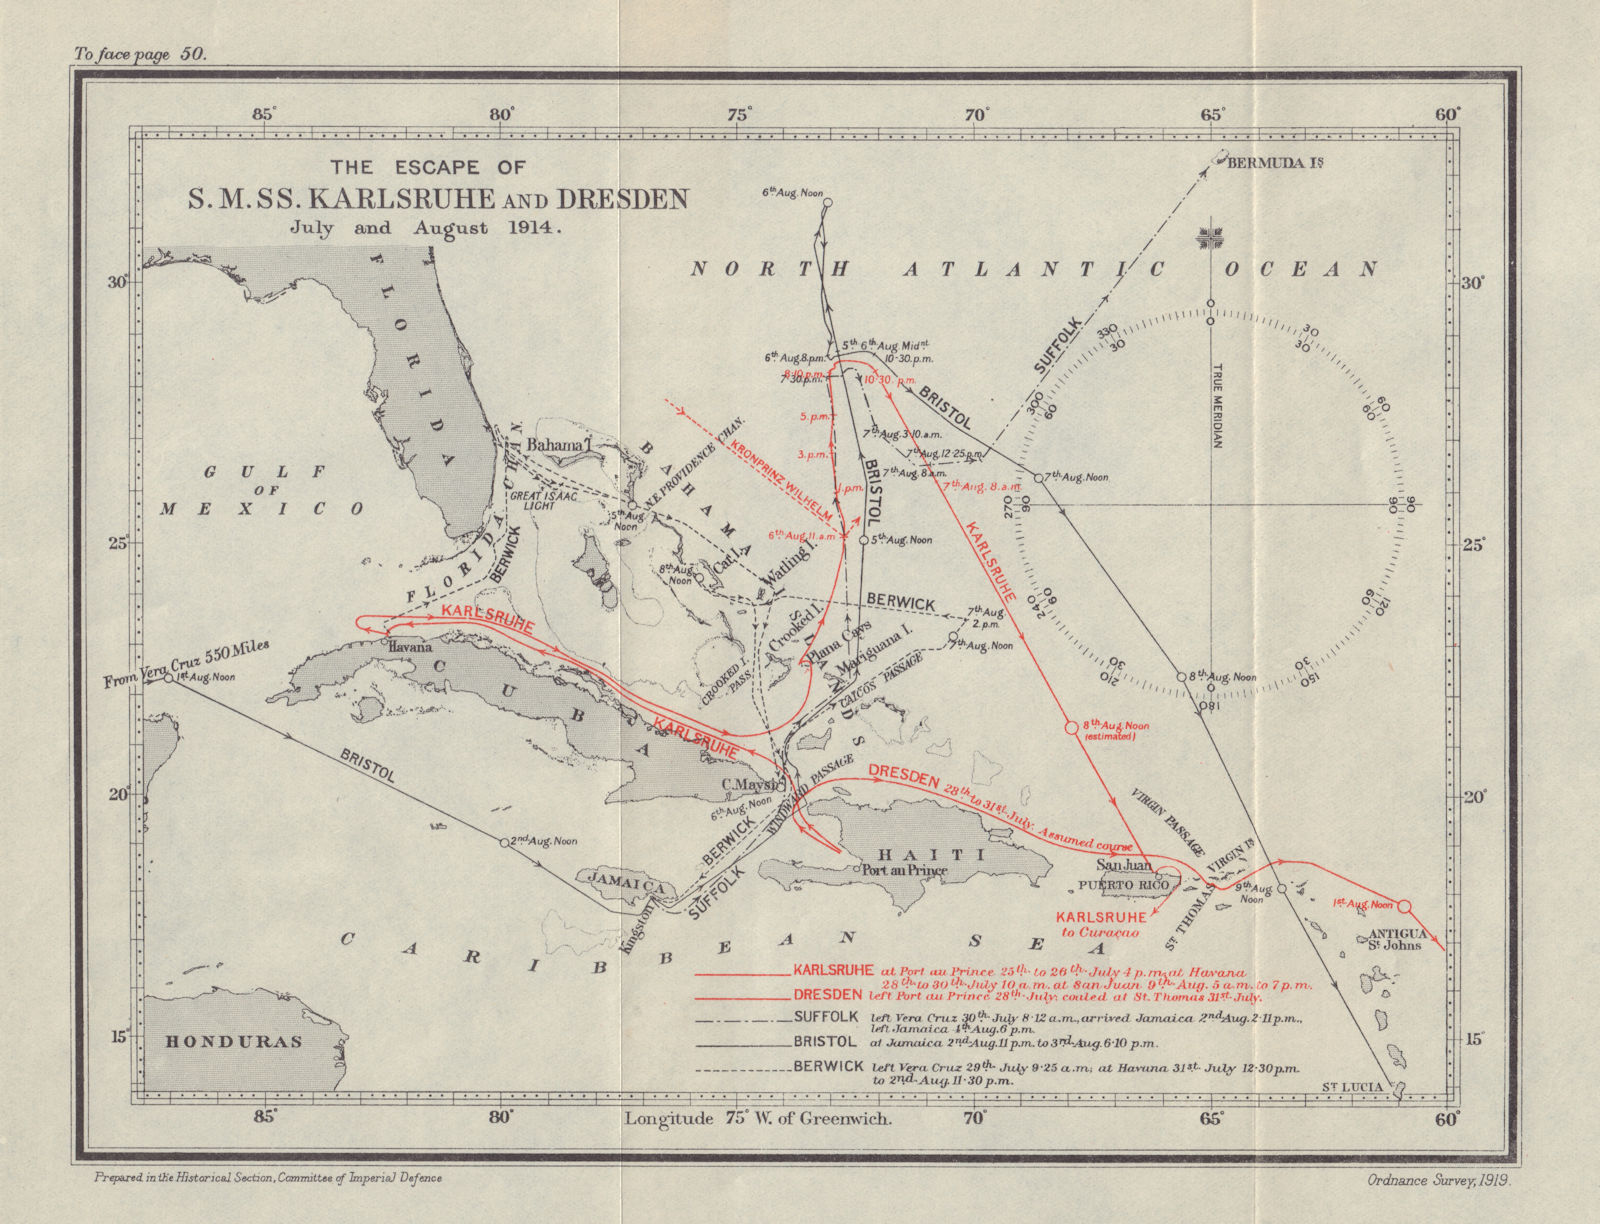 Escape of SMSS Karlsruhe & Dresden July-August 1914. Caribbean WW1. 1920 map